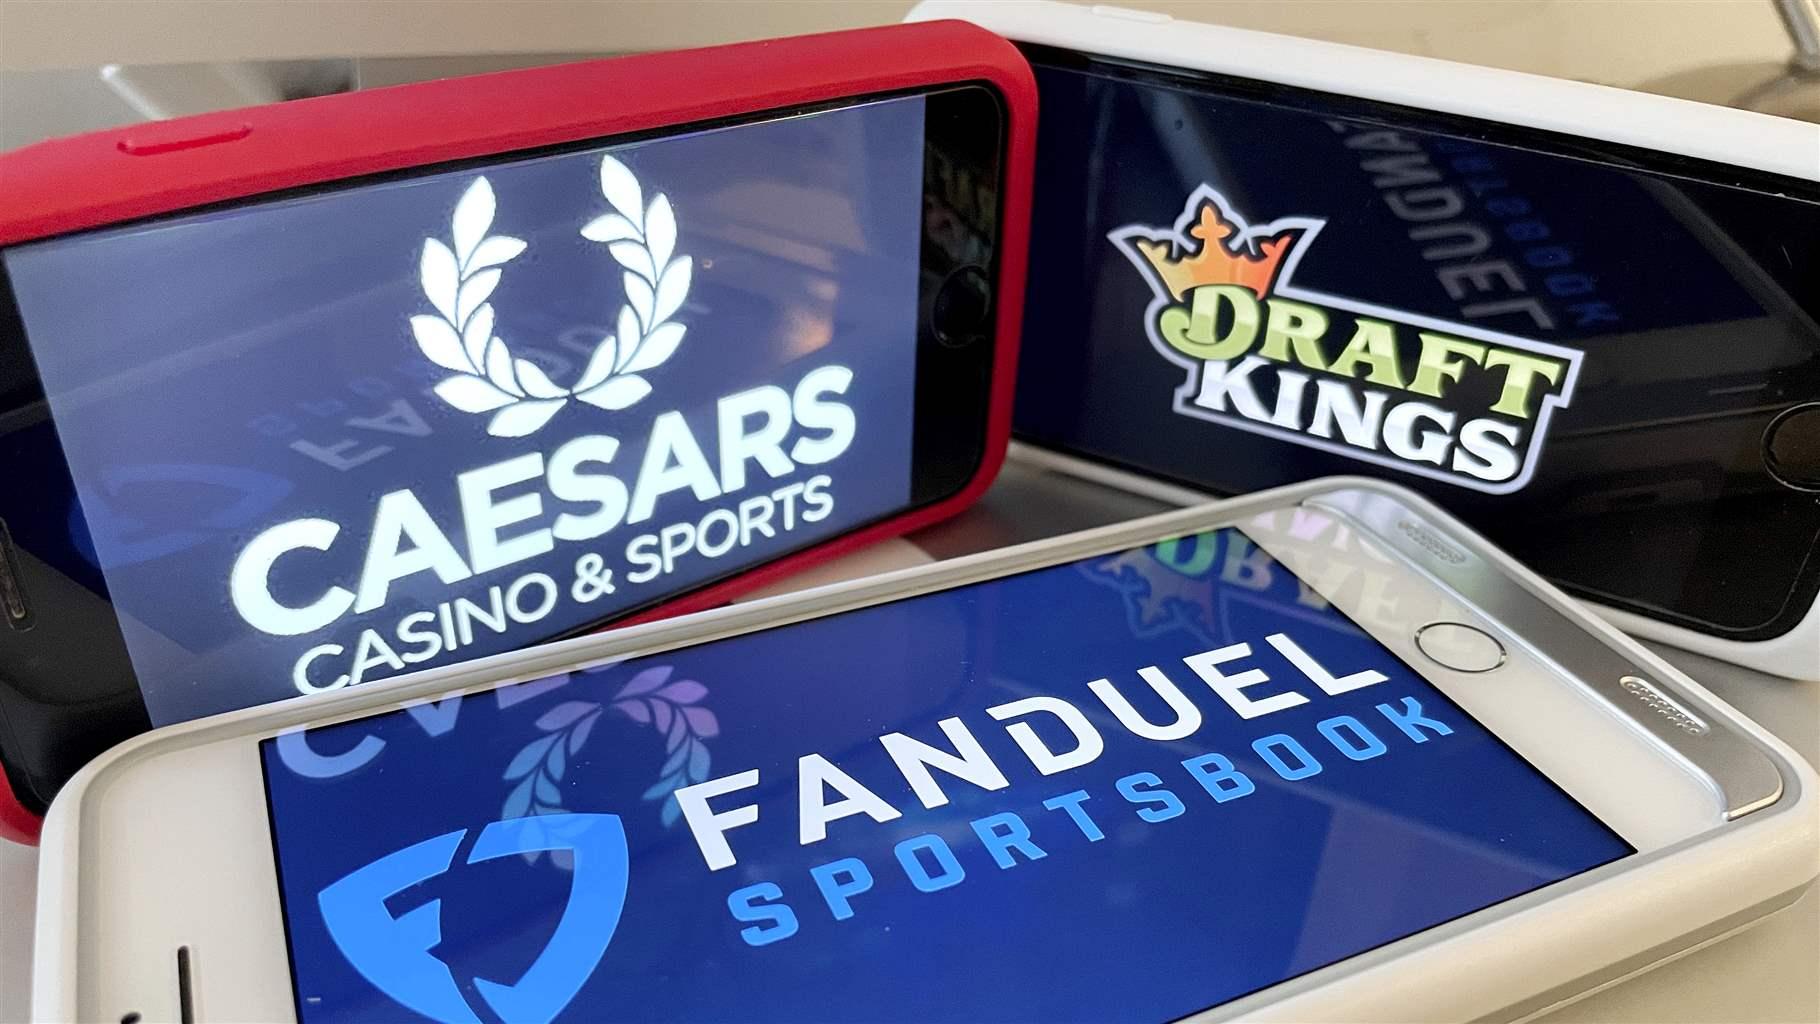 New York online sports betting to launch on Saturday, January 8th. Fanduel, Caesars, Draftkings and Rush Street Interactive have met the regulatory requirements to launch this weekend.